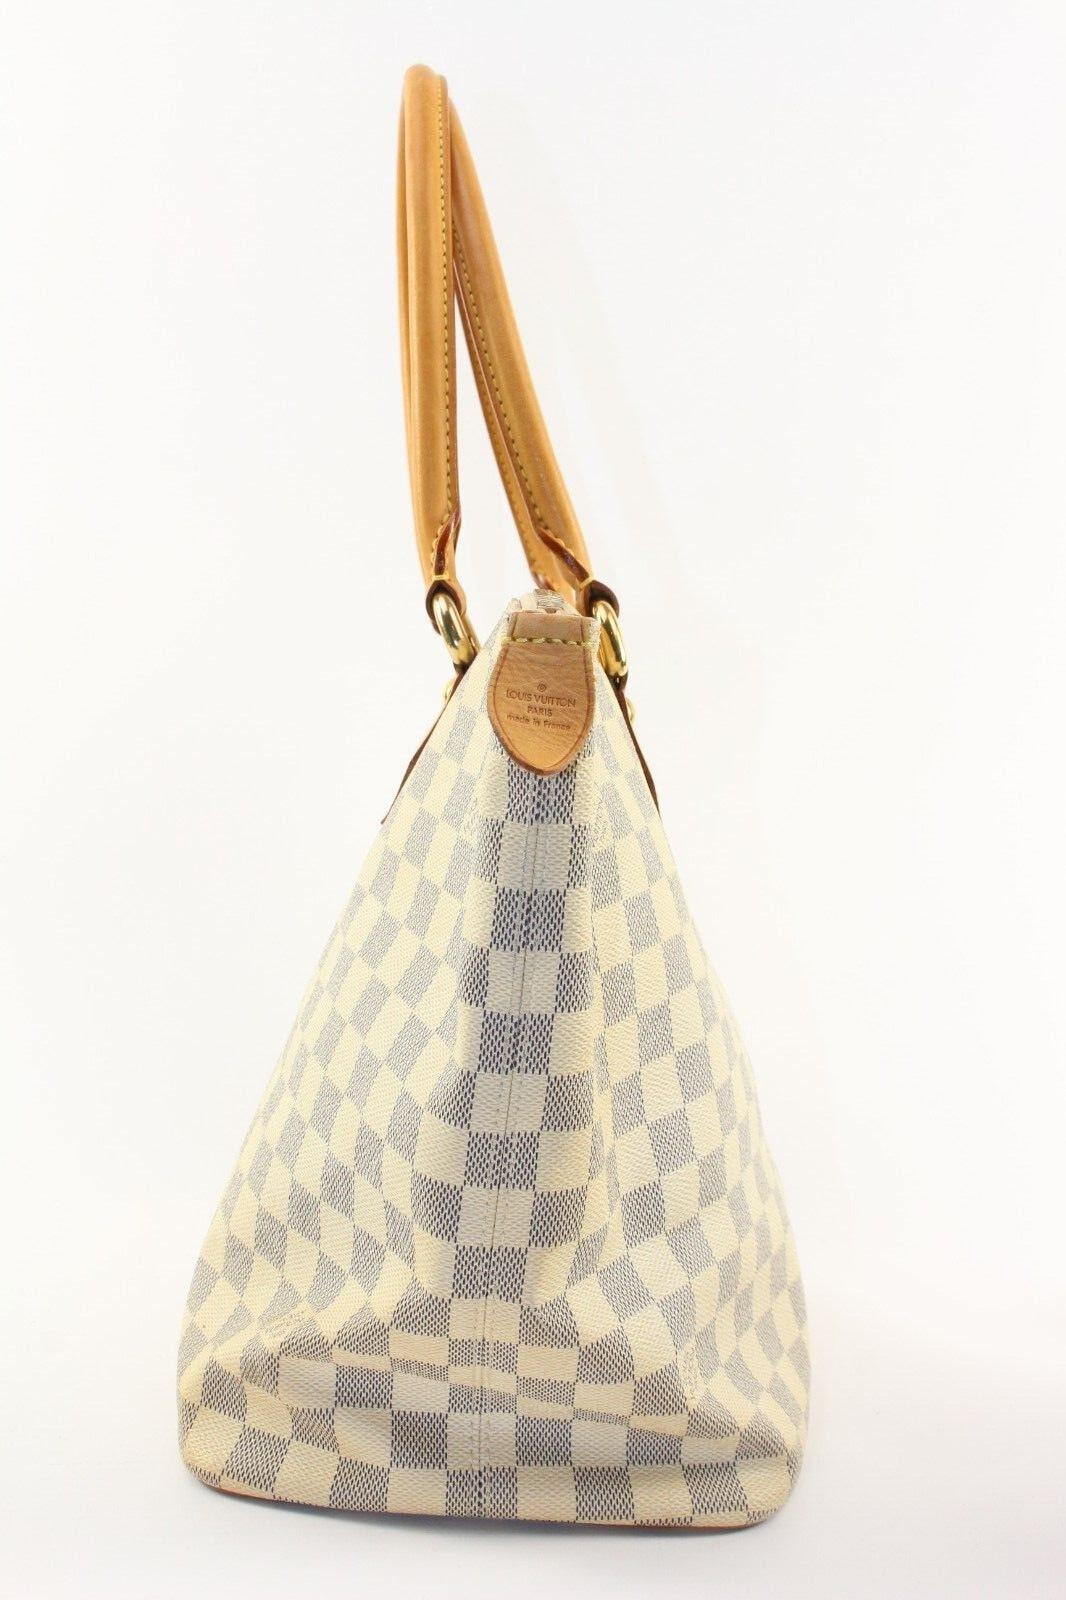 LOUIS VUITTON Damier Azur Saleya 1LV0104K In Fair Condition For Sale In Dix hills, NY